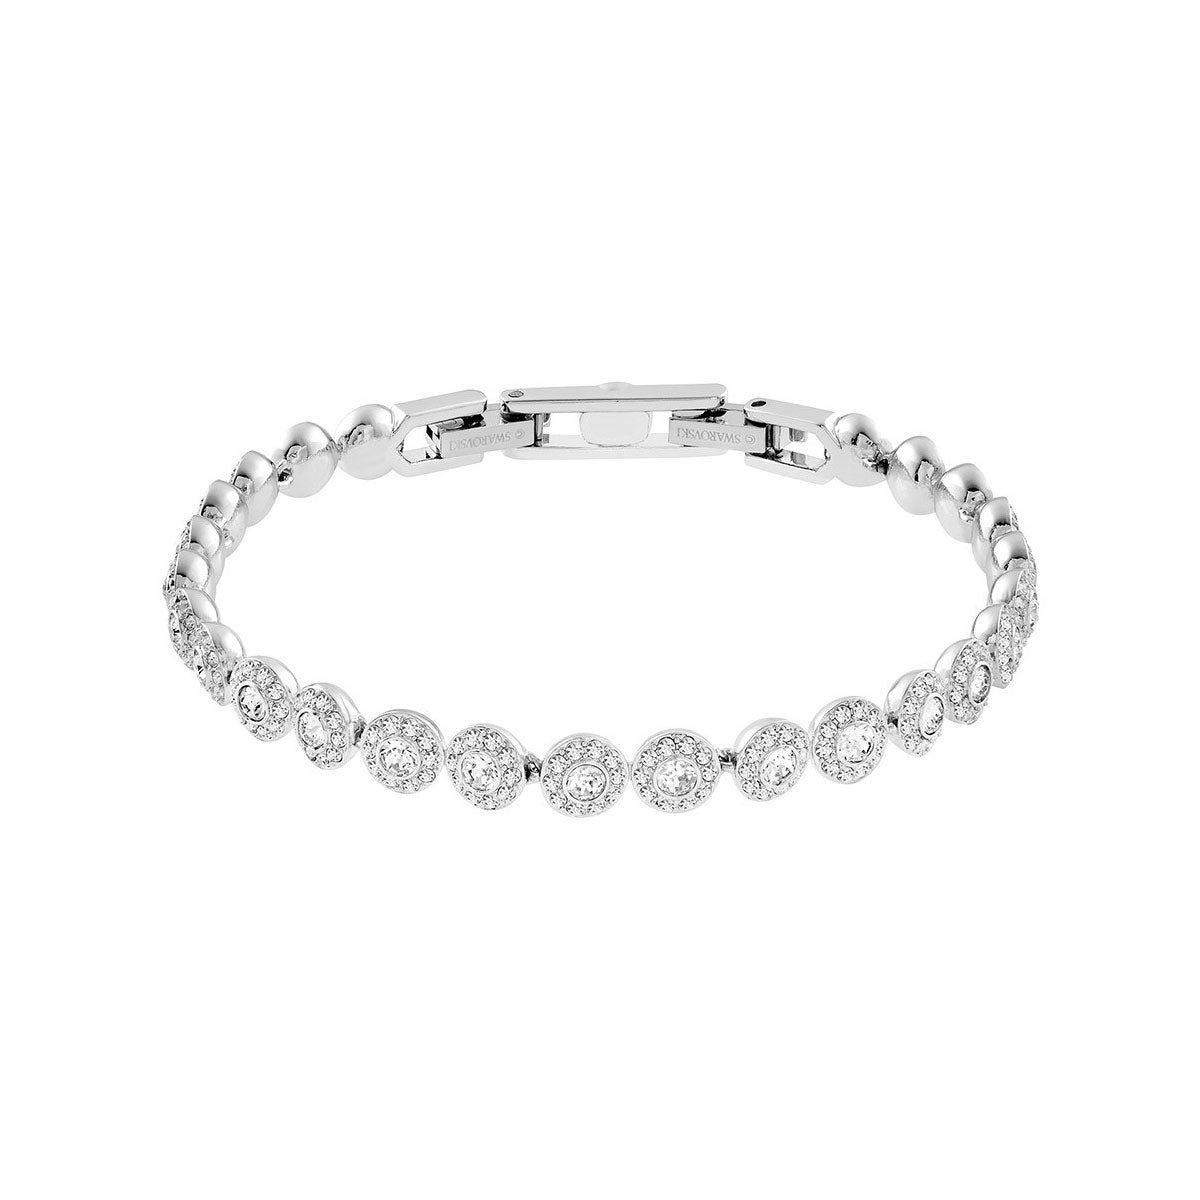 Swari Angelic Bracelet Crystal Jewelry Collection, Rhodium Tone Finish, Clear Crystal